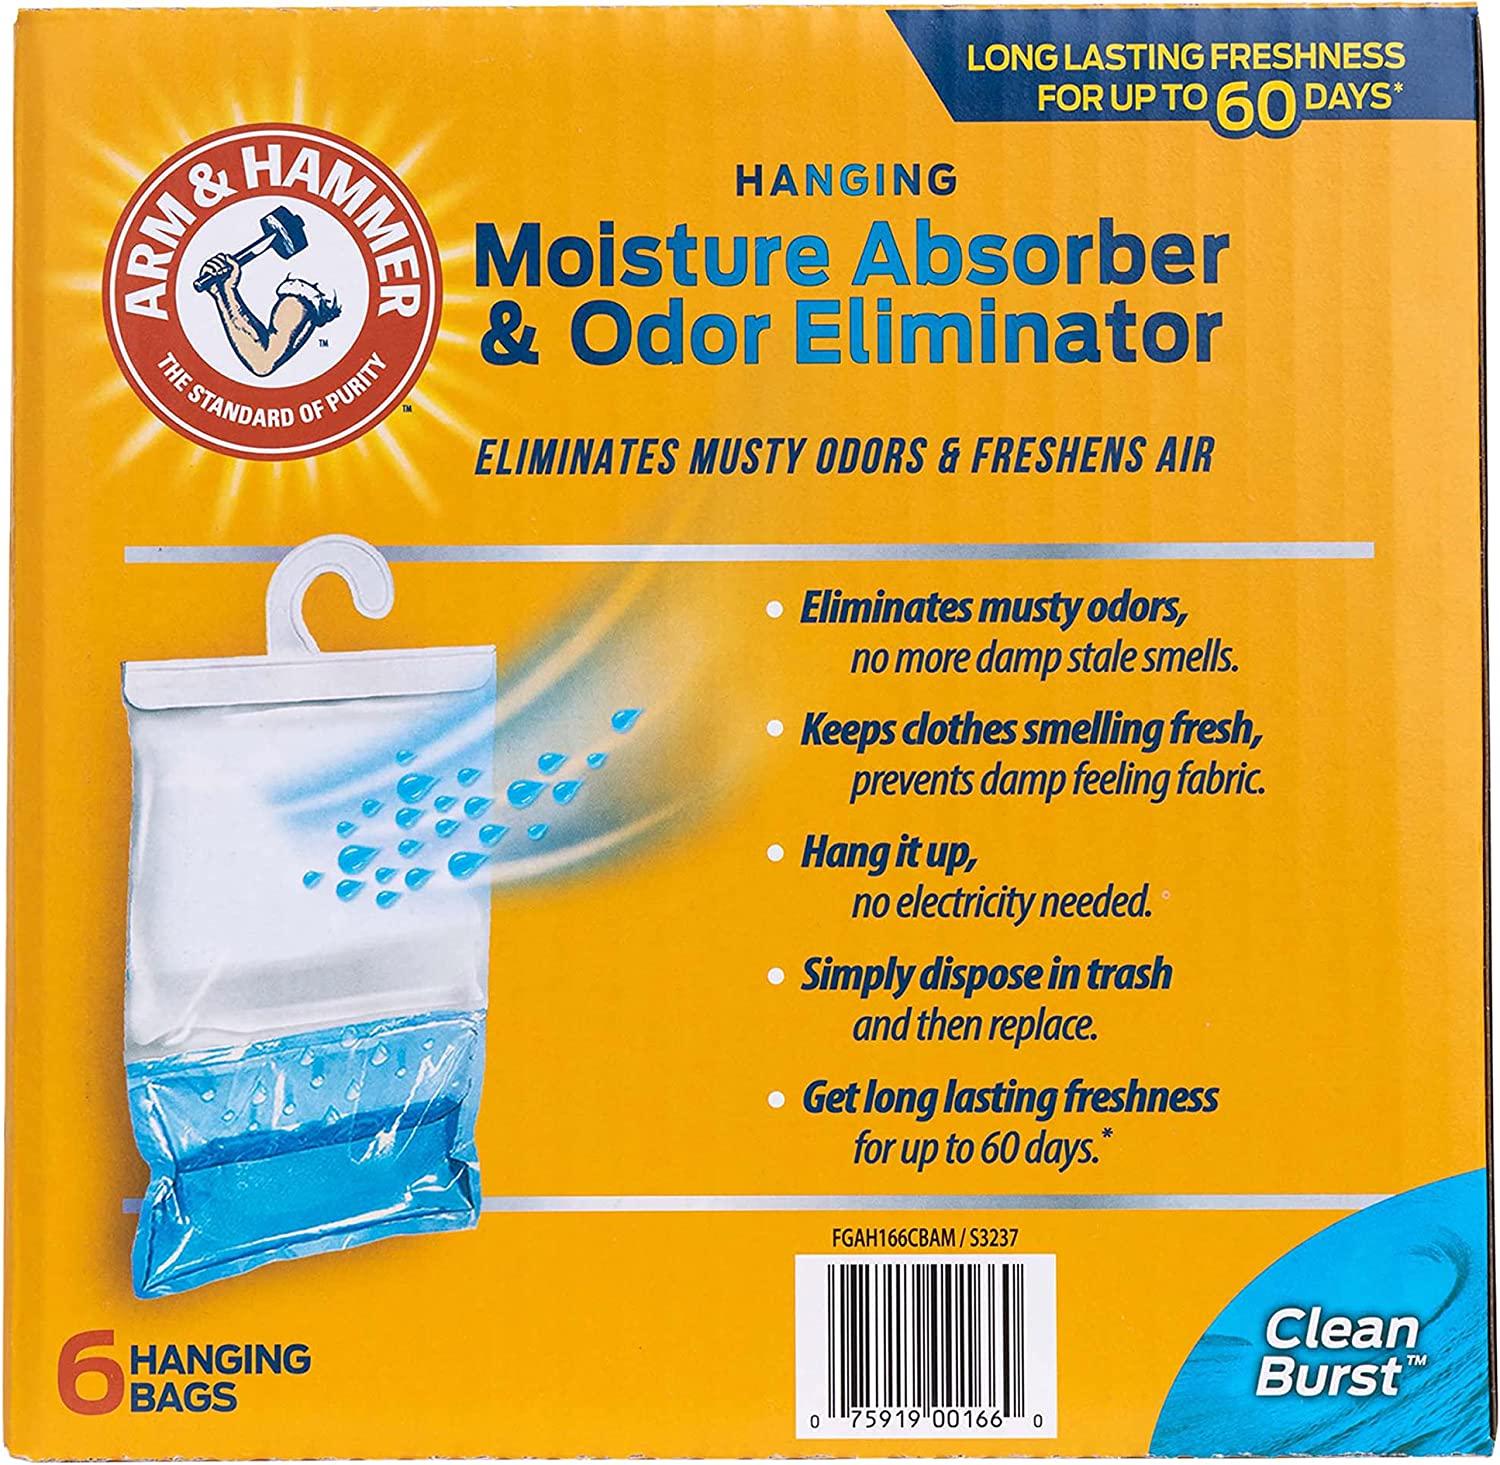 Arm & Hammer Hanging Moisture Absorber and Odor Eliminator, 16.1 oz., 6  Pack - Clean Burst, Moisture Absorbers for Closet and Small Rooms,  Long-Lasting Freshness